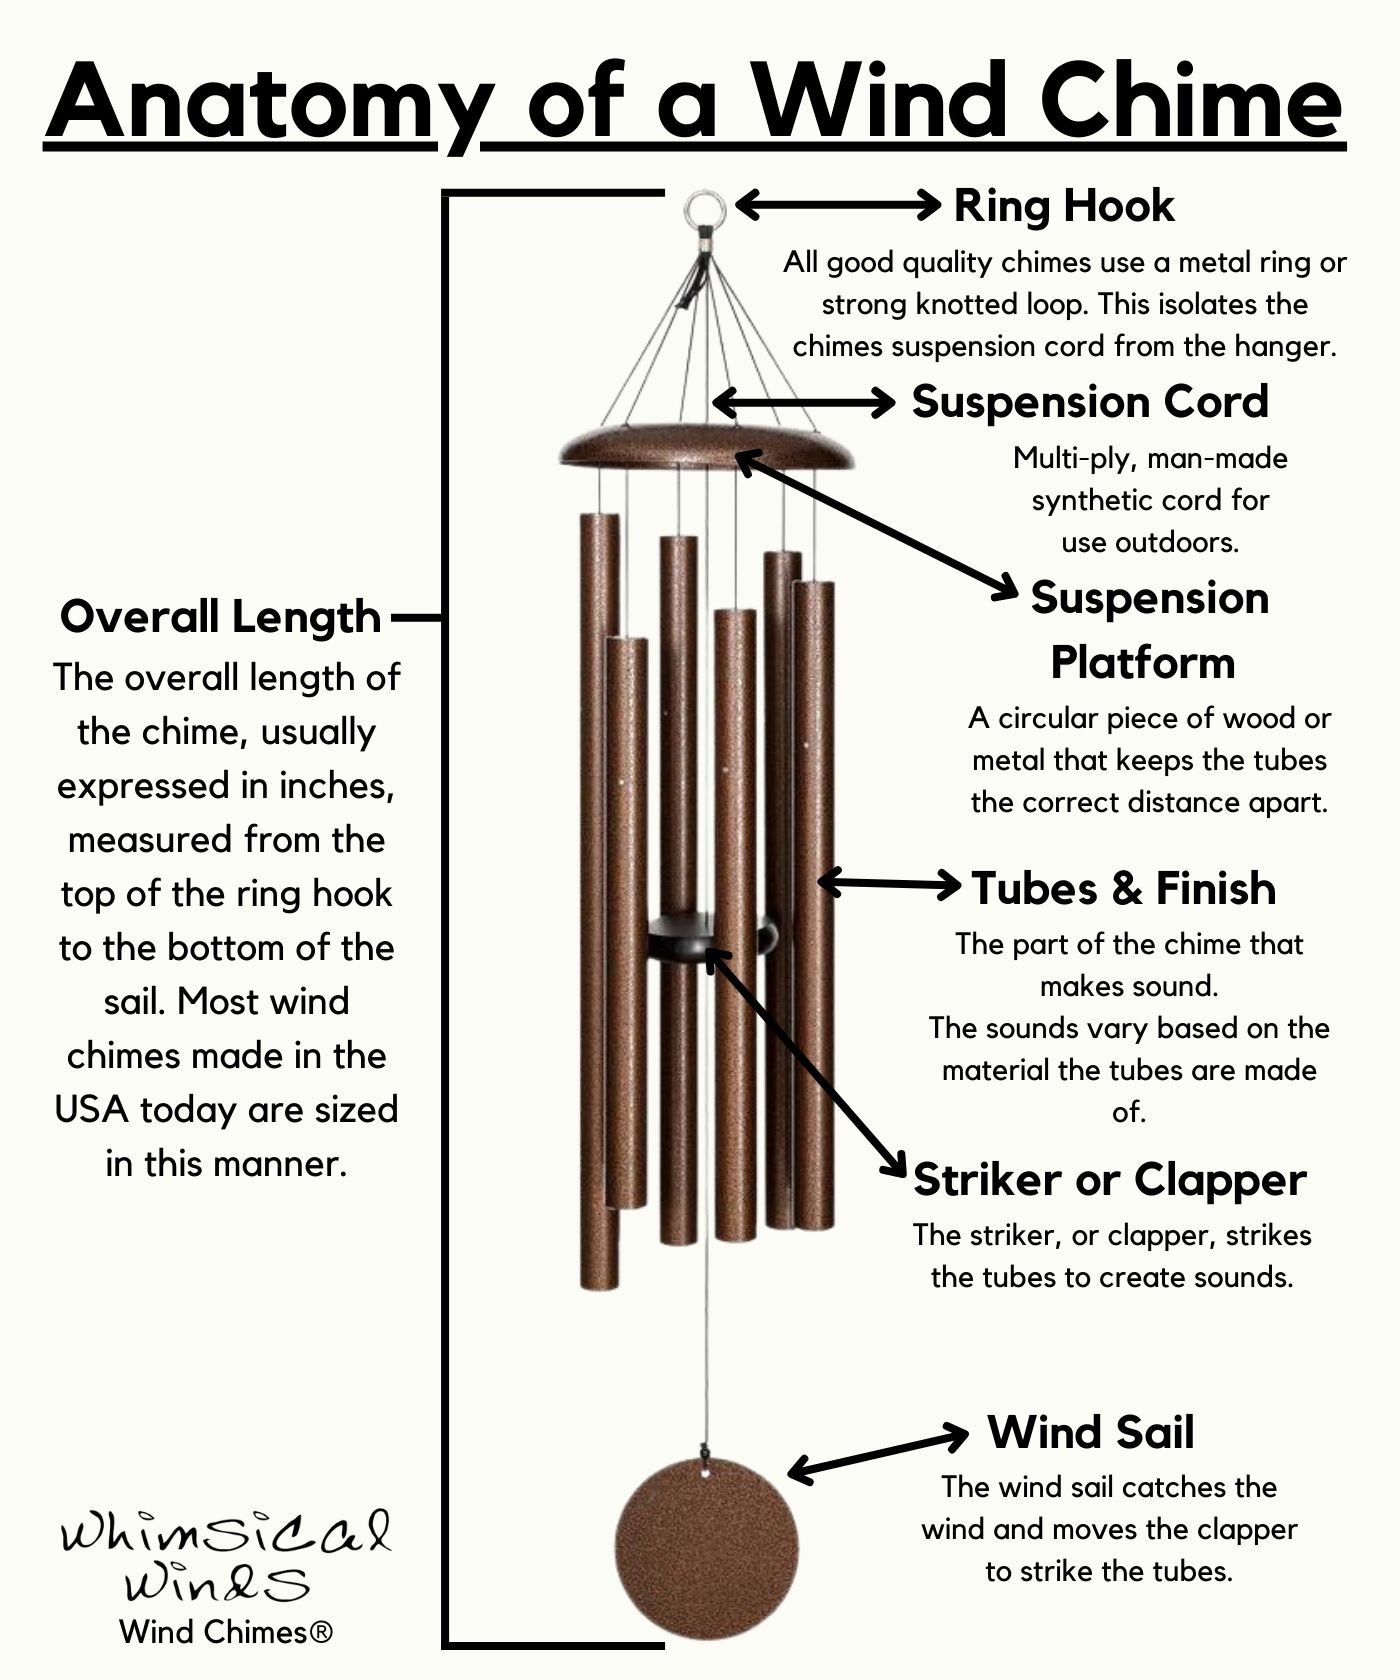 Anatomy of a Wind Chime Ring Hook All good quality chimes use a metal ring or strong knotted loop. This isolates the chimes suspension cord from the hanger. Suspension Cord Multi-ply, man-made synthetic cord for use outdoors. Suspension Platform A circular piece of wood or metal that keeps the tubes the correct distance apart. Tubes & Finish The part of the chime that makes sound. The sounds vary based on the material the tubes are made of. Striker or Clapper The striker, or clapper, strikes the tubes to create sounds. Wind Sail The wind sail catches the wind and moves the clapper to strike the tubes. The overall length of the chime, usually expressed in inches, measured from the top of the ring hook to the bottom of the sail. Most wind chimes made in the USA today are sized in this manner. Overall Length The overall length of the chime, usually expressed in inches, measured from the top of the ring hook to the bottom of the sail. Most wind chimes made in the USA today are sized in this manner. 